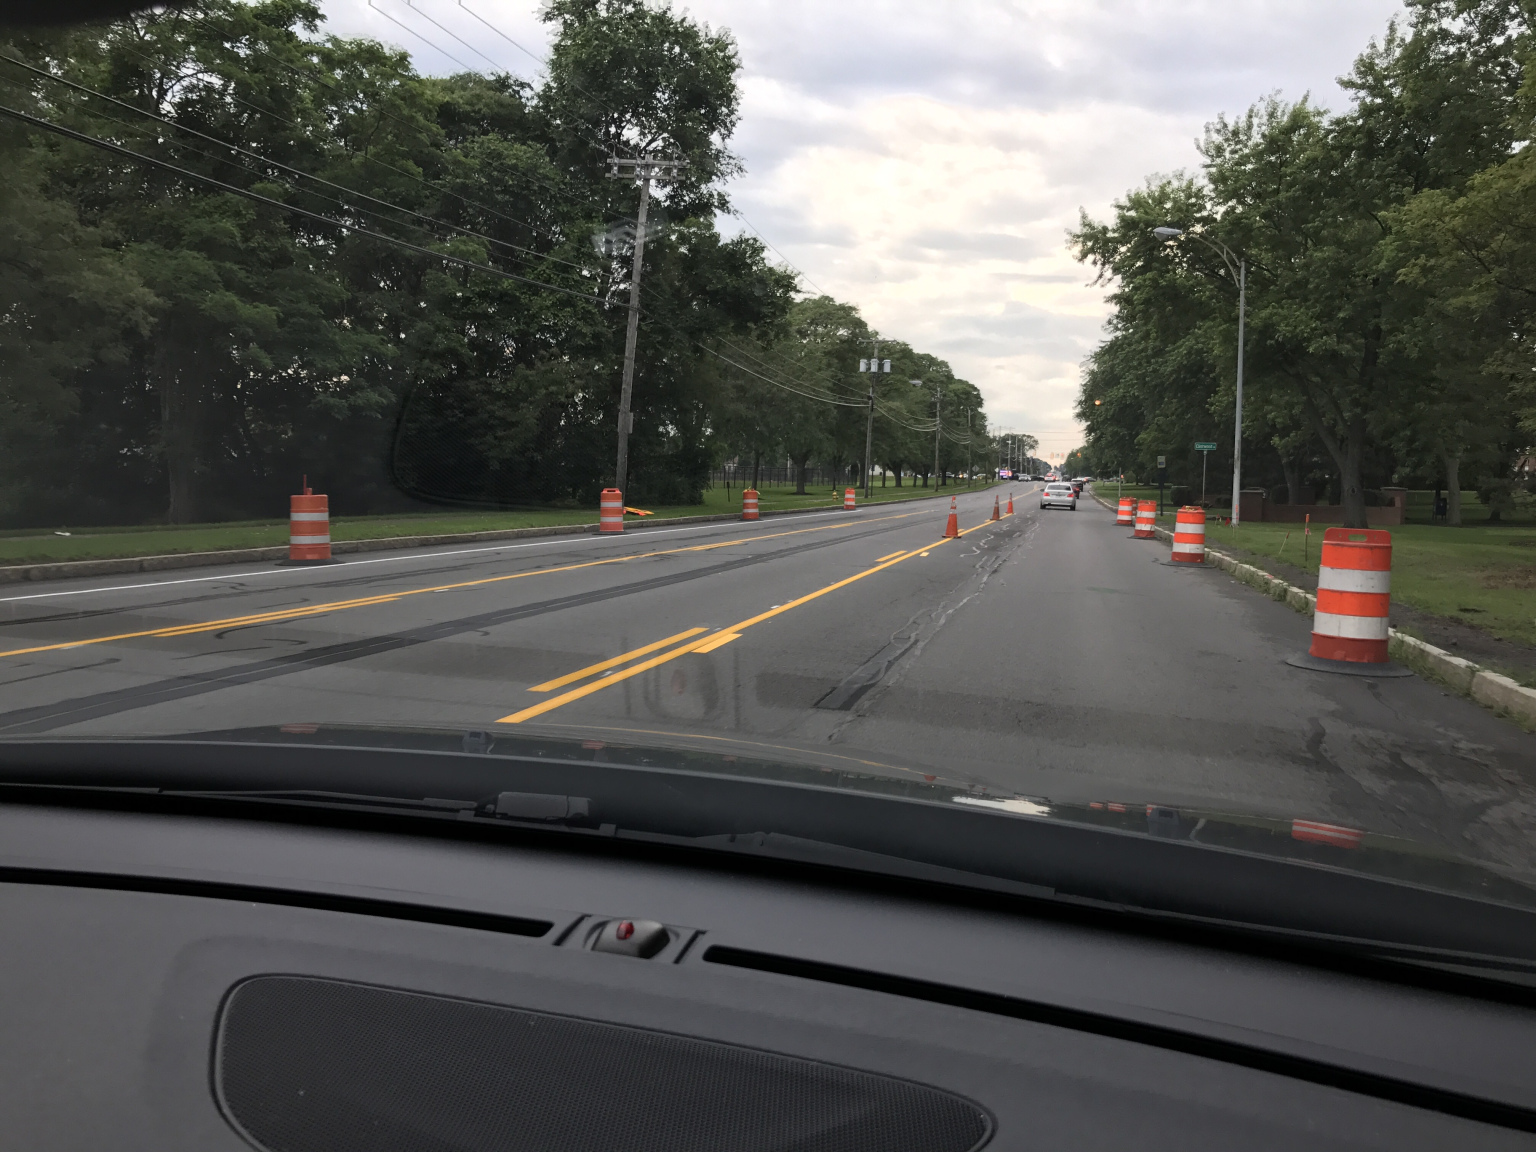  Temporarily, a section of Elmwood was reduced to two lanes and a turning lane. Many thought this might be the beginnings of a road diet… 